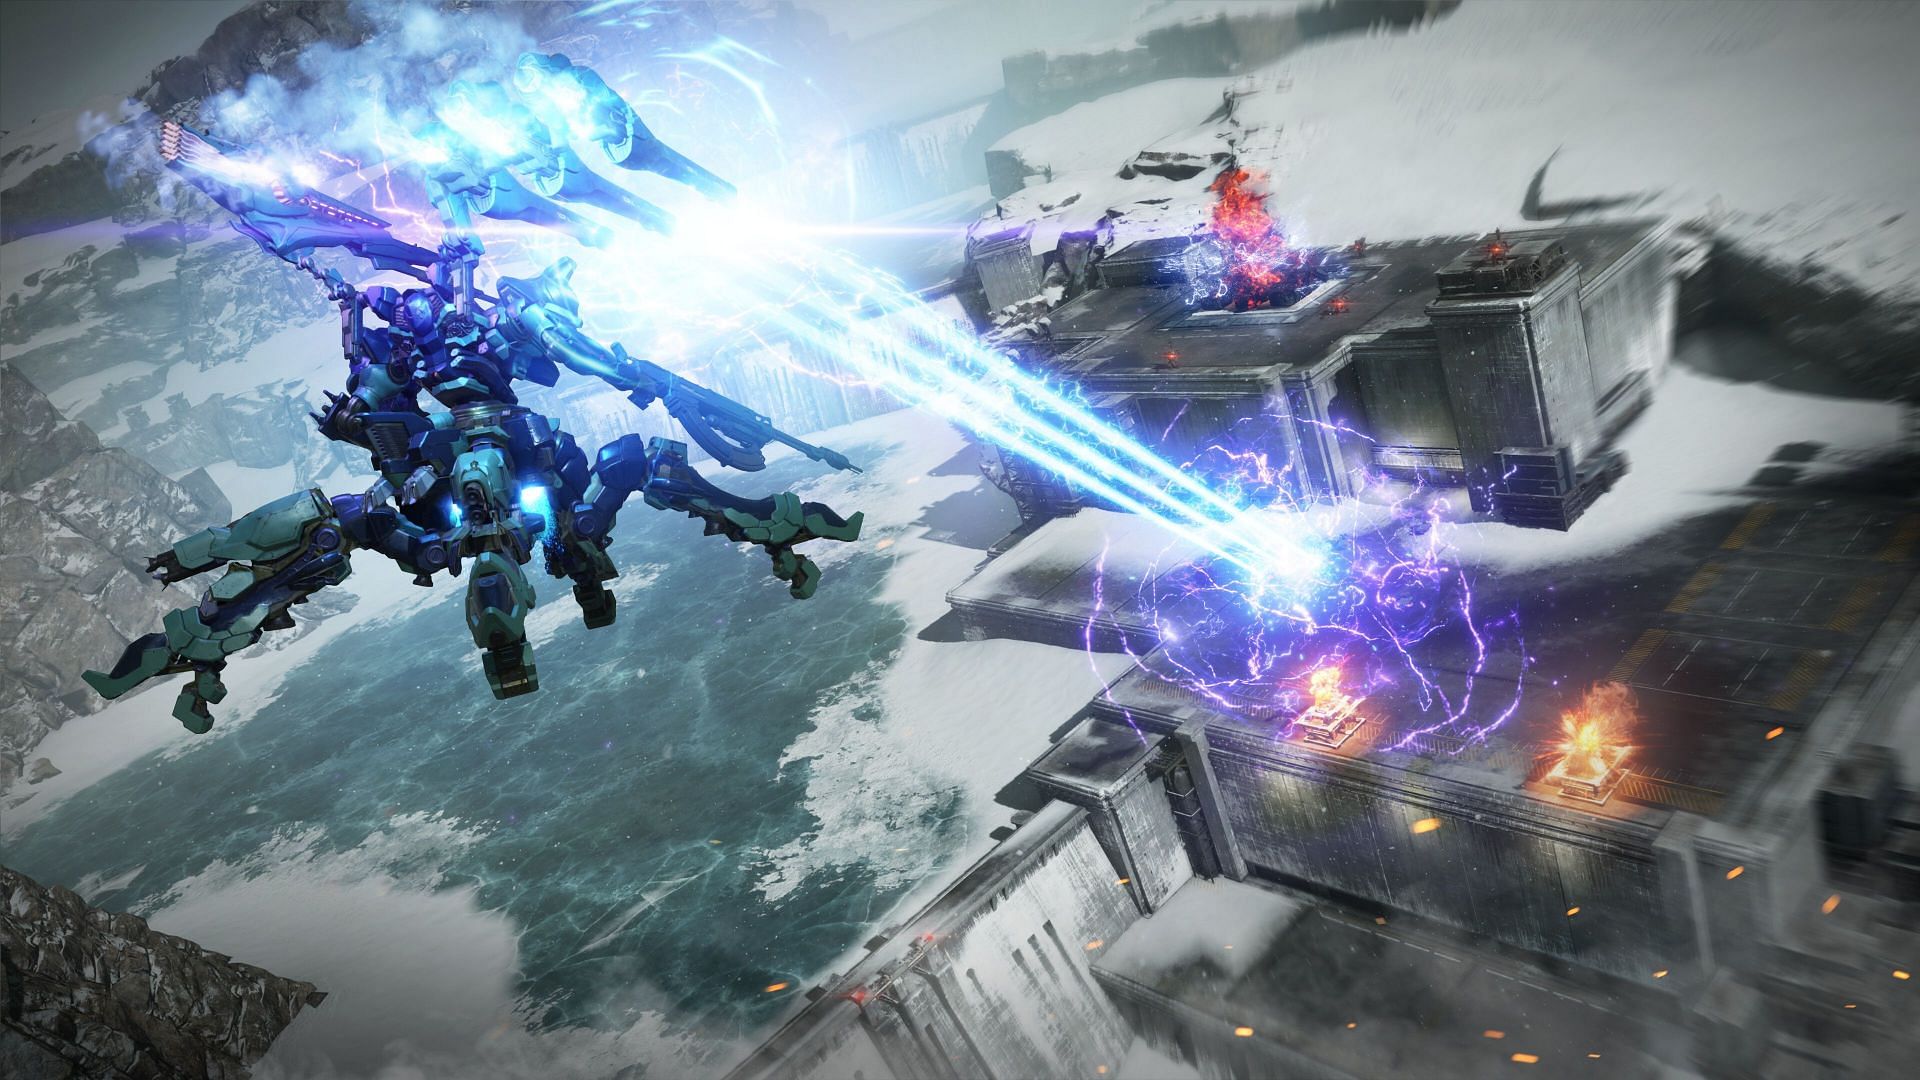 Last Chance To Get Armored Core 6 Preorder Bonuses And A Discount